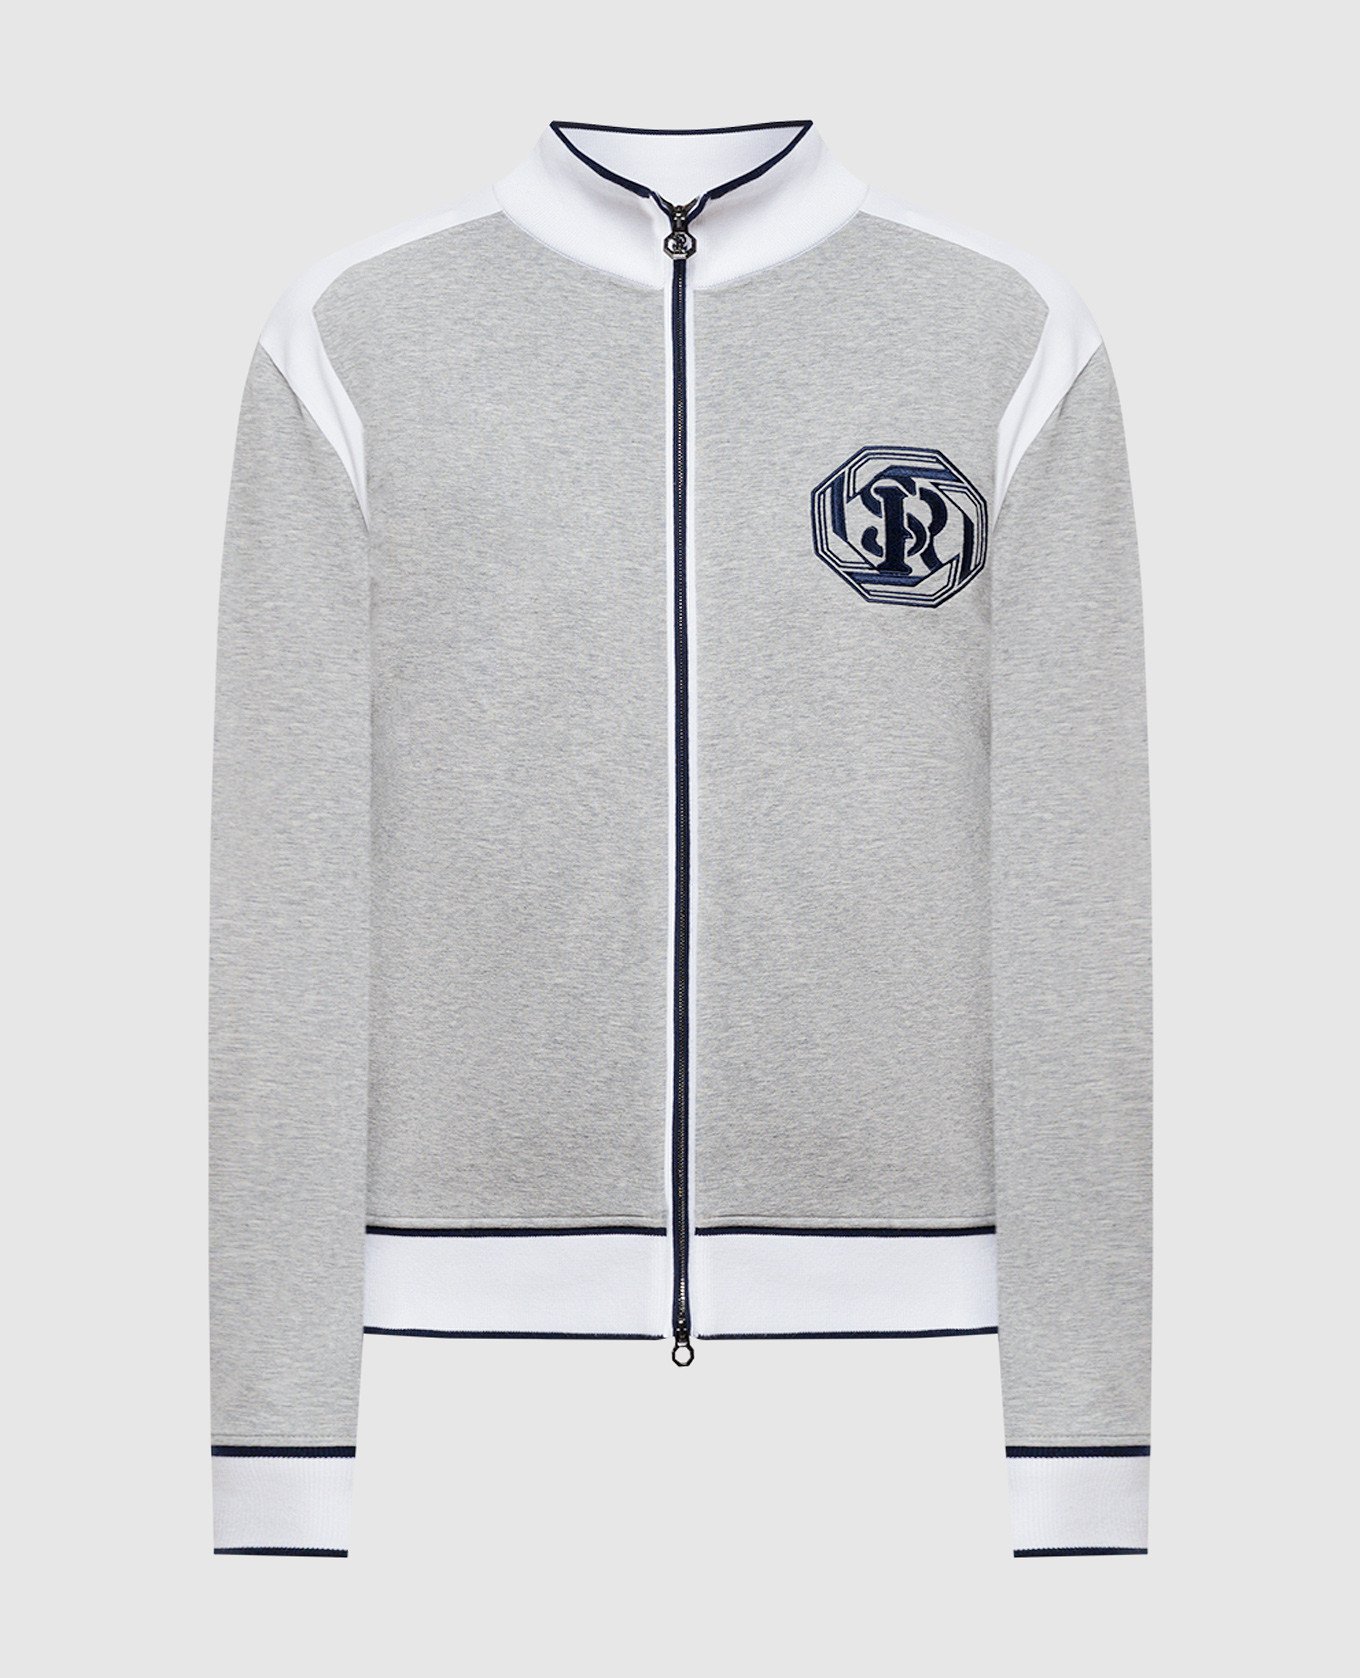 Gray sports jacket with logo embroidery